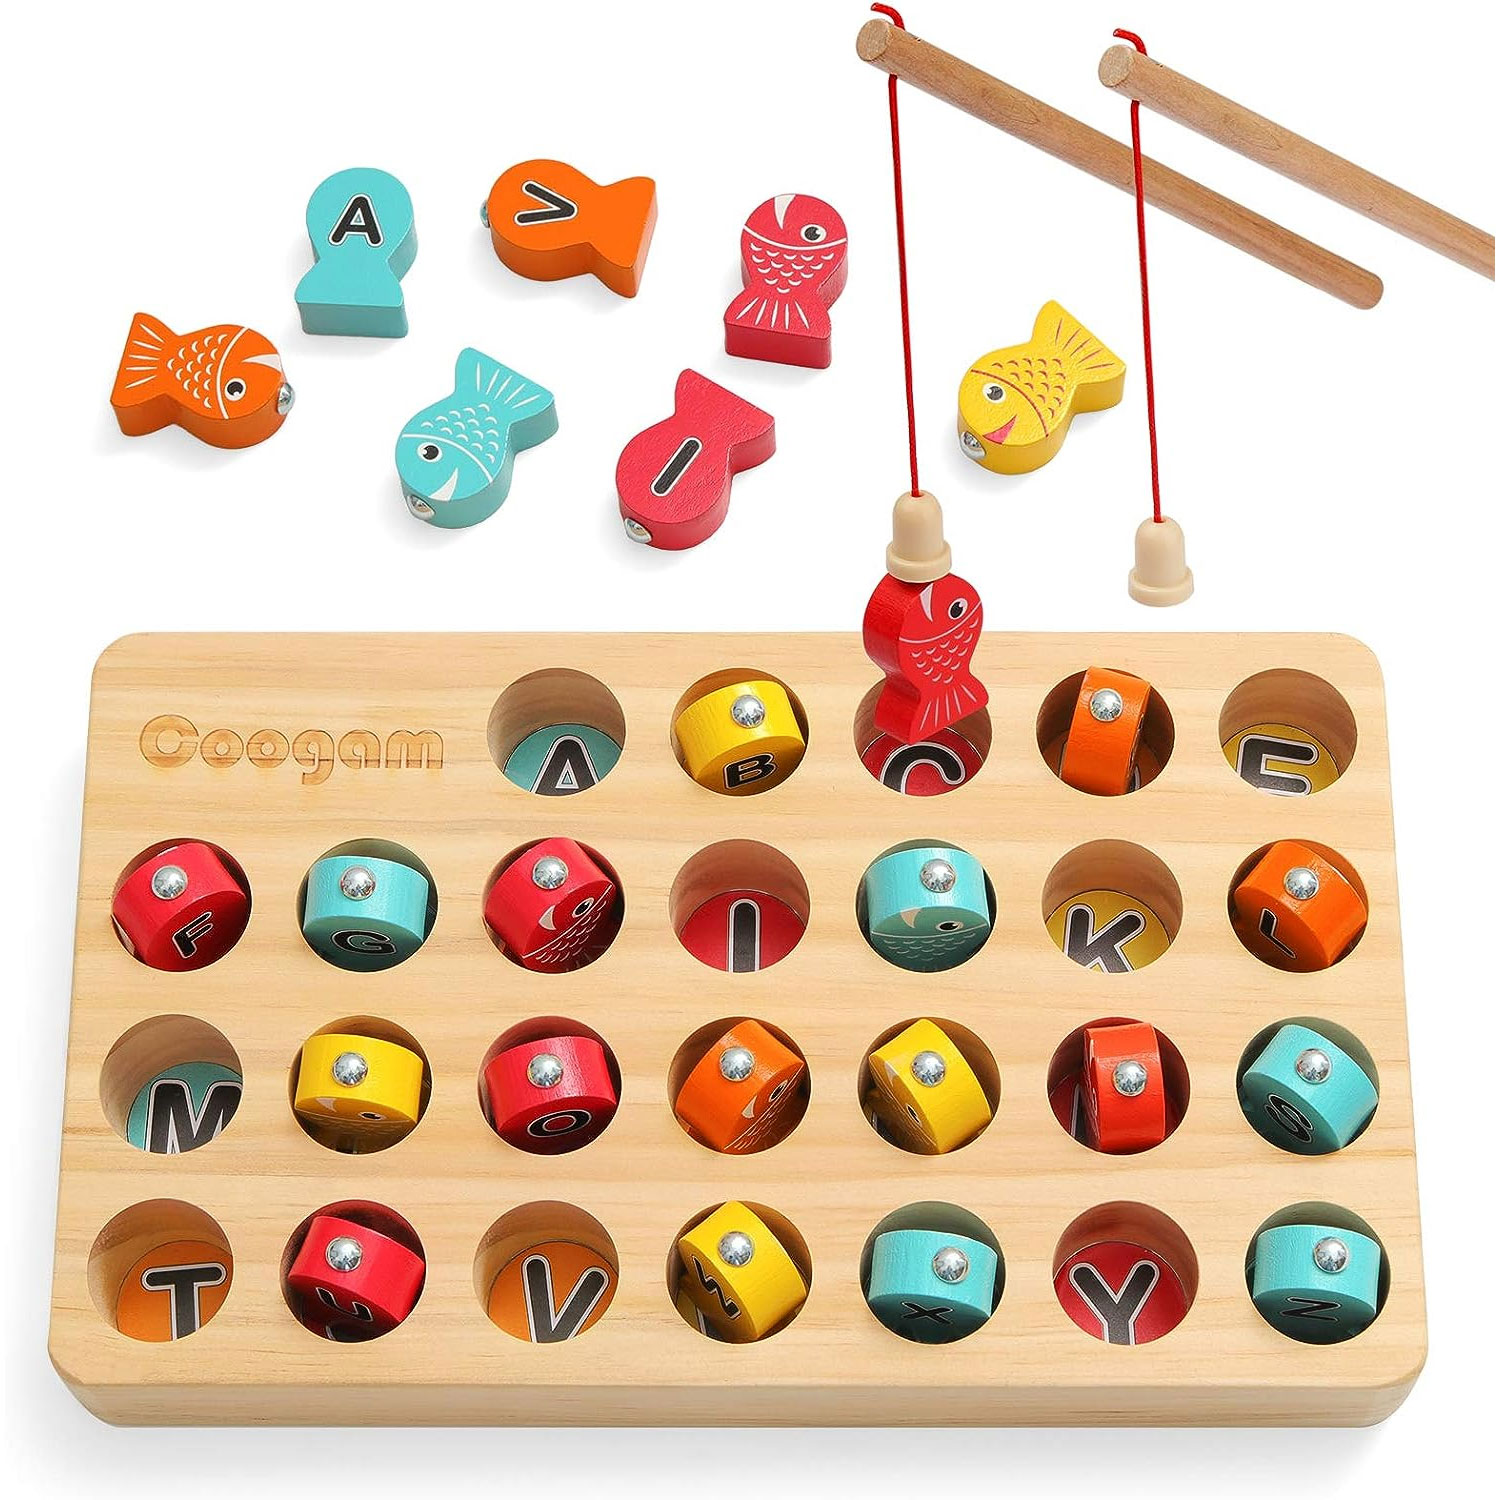 Coogam Wooden Alphabet Magnetic Fishing Game